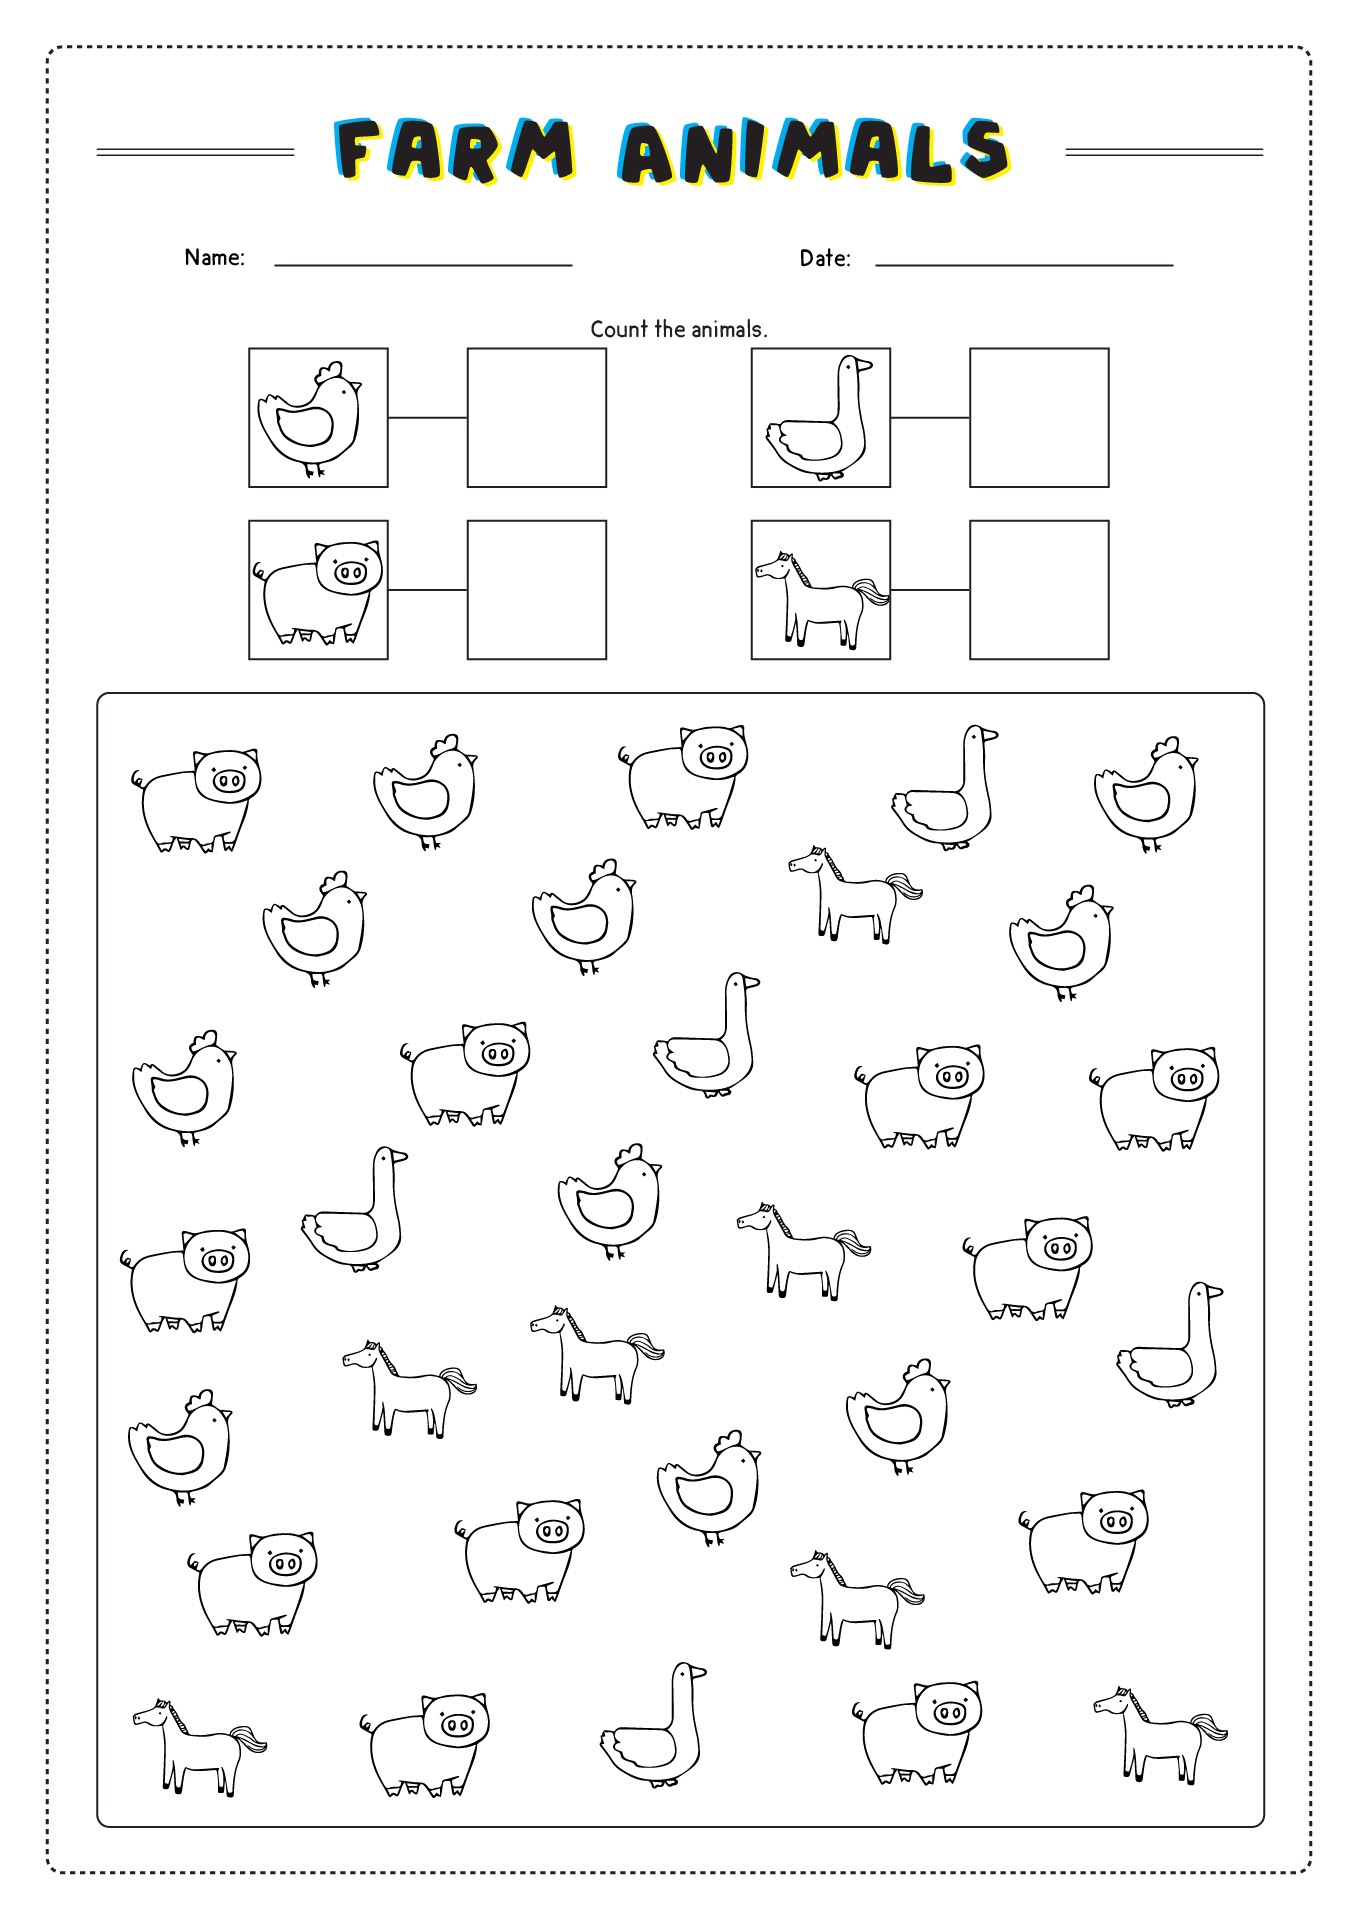 jungle-animals-and-numbers-interactive-worksheet